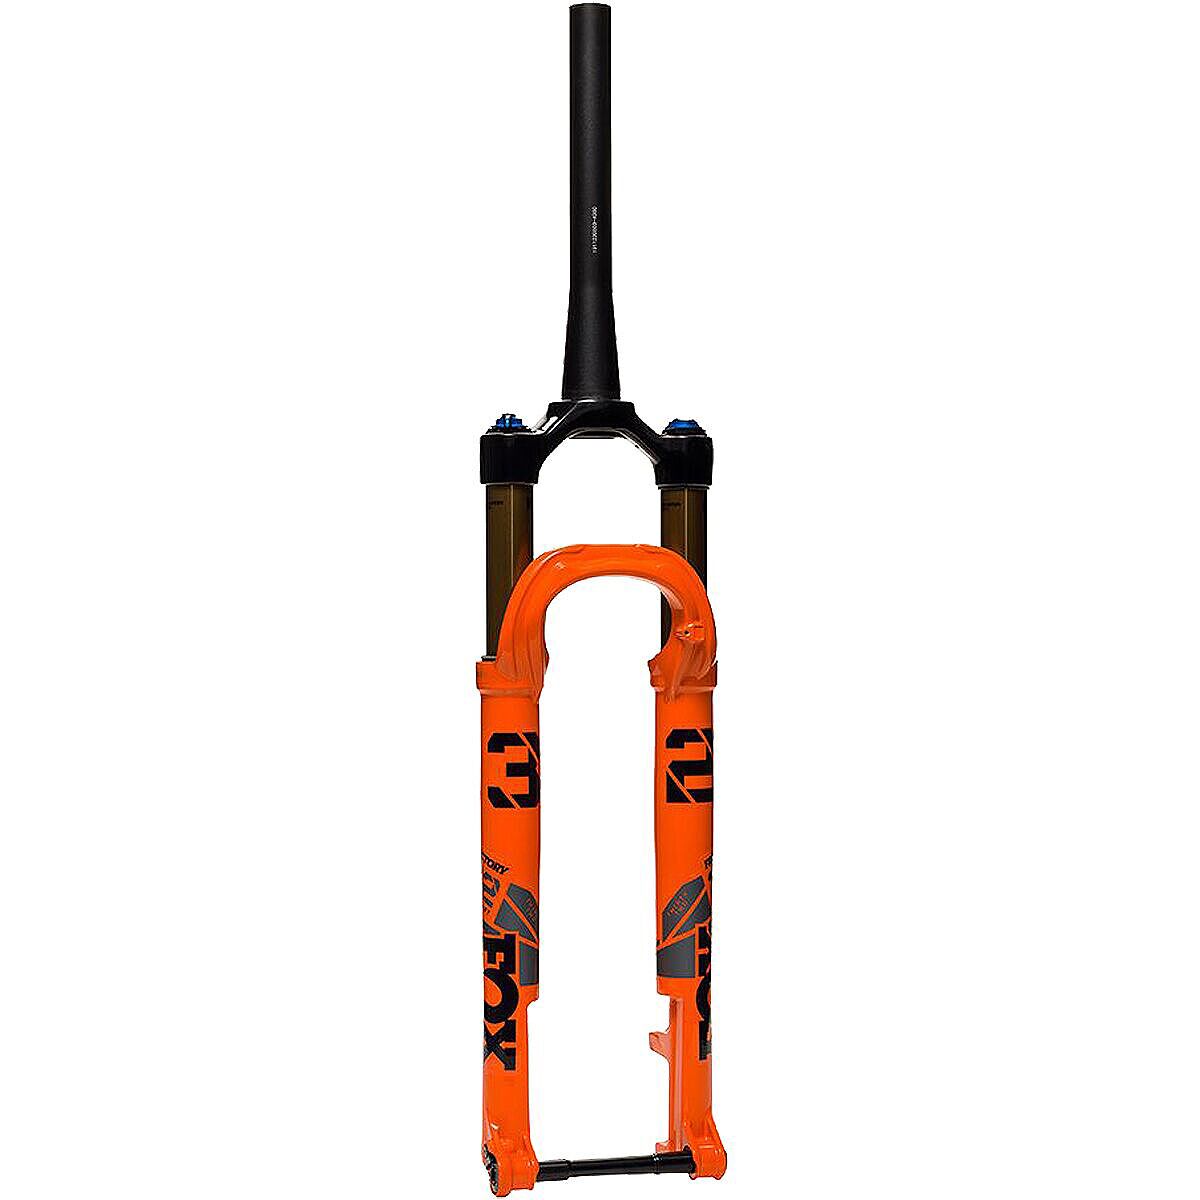 FOX Shox 32 Float SC 29 FIT4 Factory Boost Fork Components